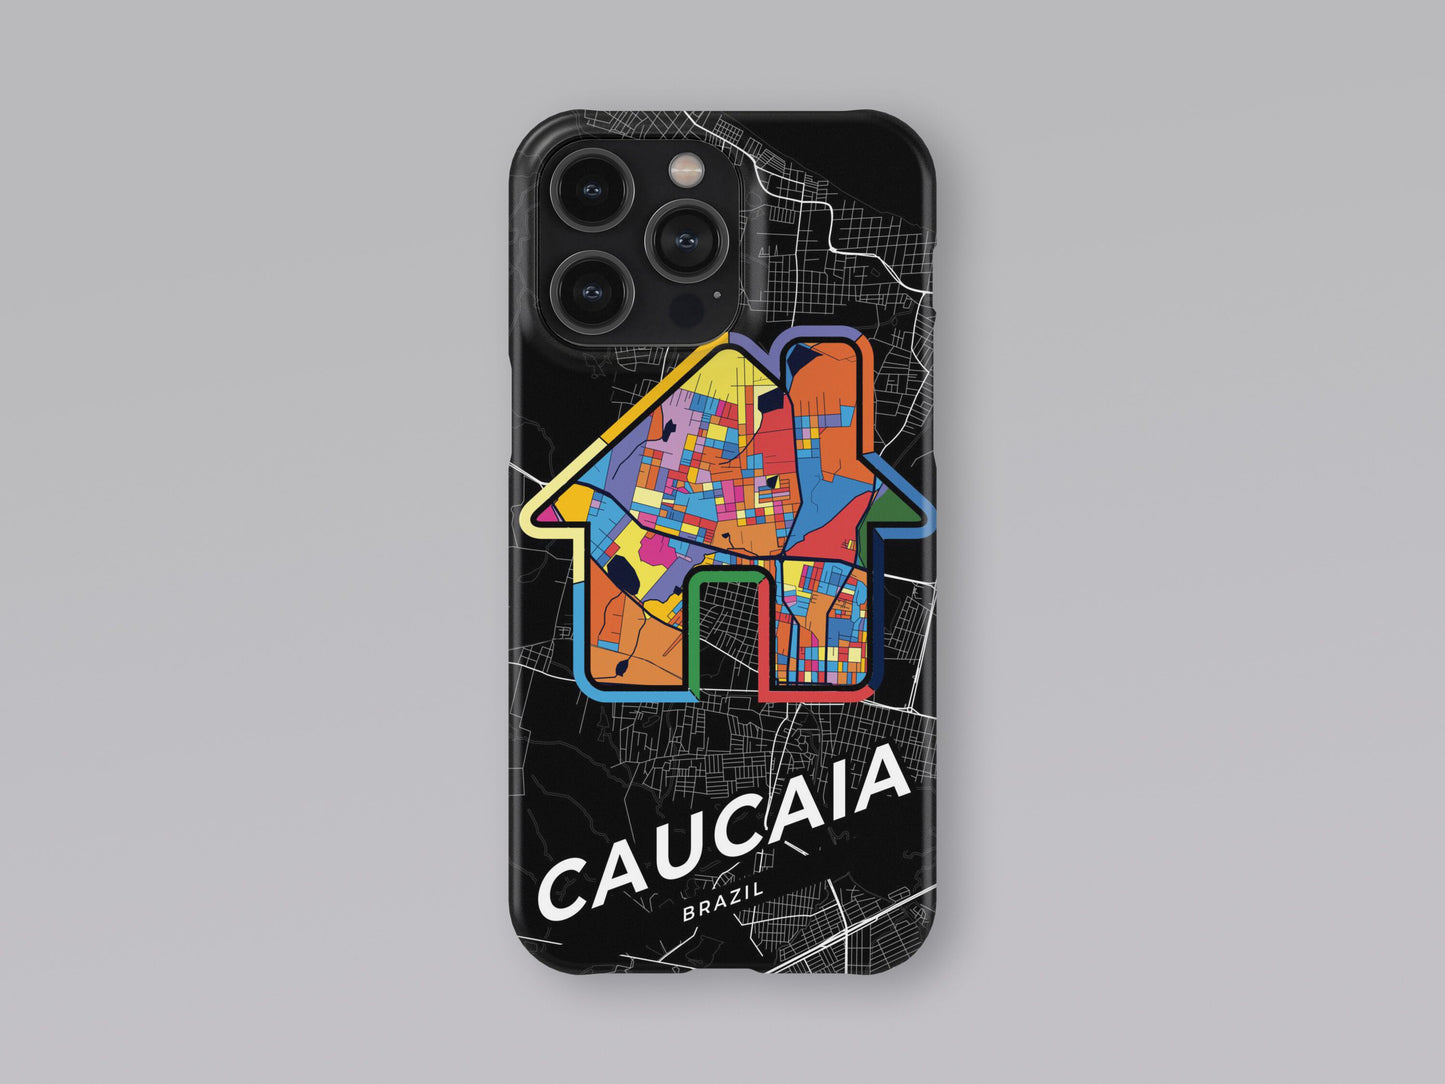 Caucaia Brazil slim phone case with colorful icon. Birthday, wedding or housewarming gift. Couple match cases. 3